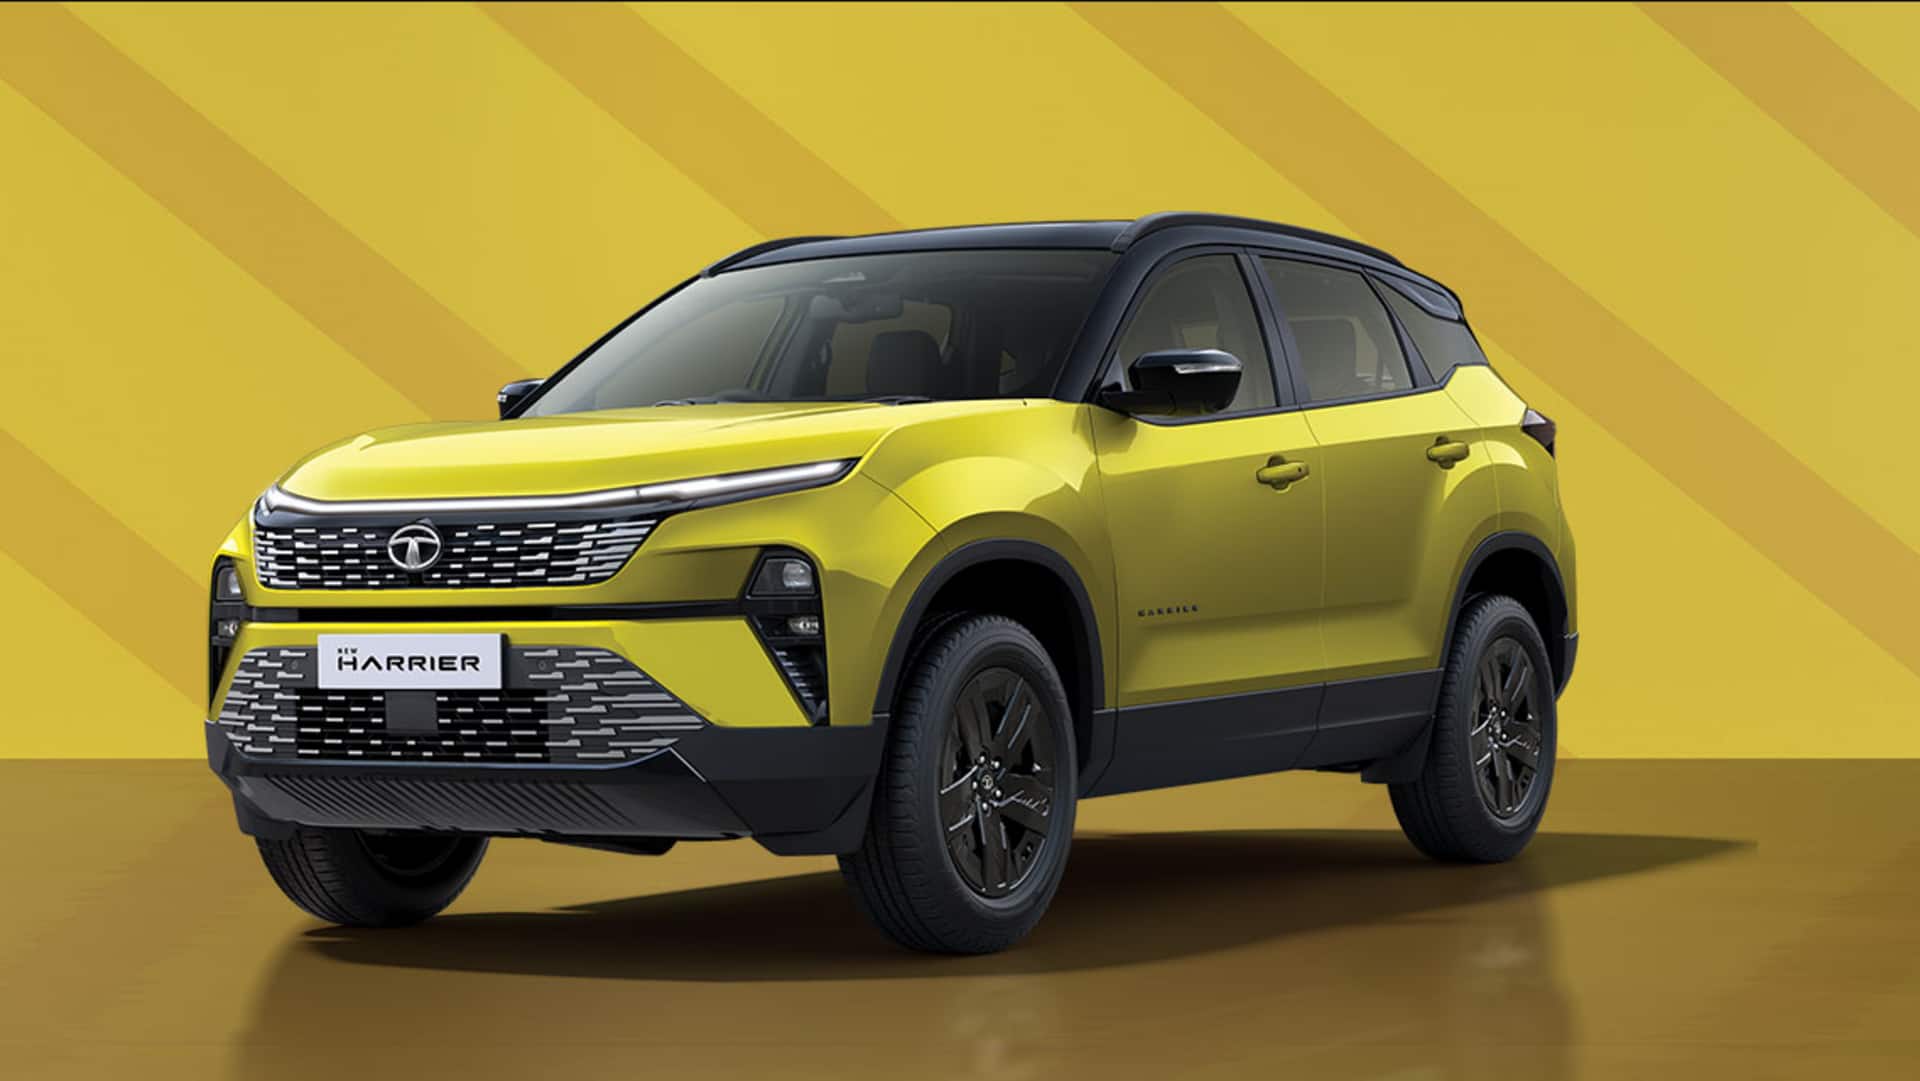 Tata Harrier SUV now available with benefits worth Rs. 1.25L